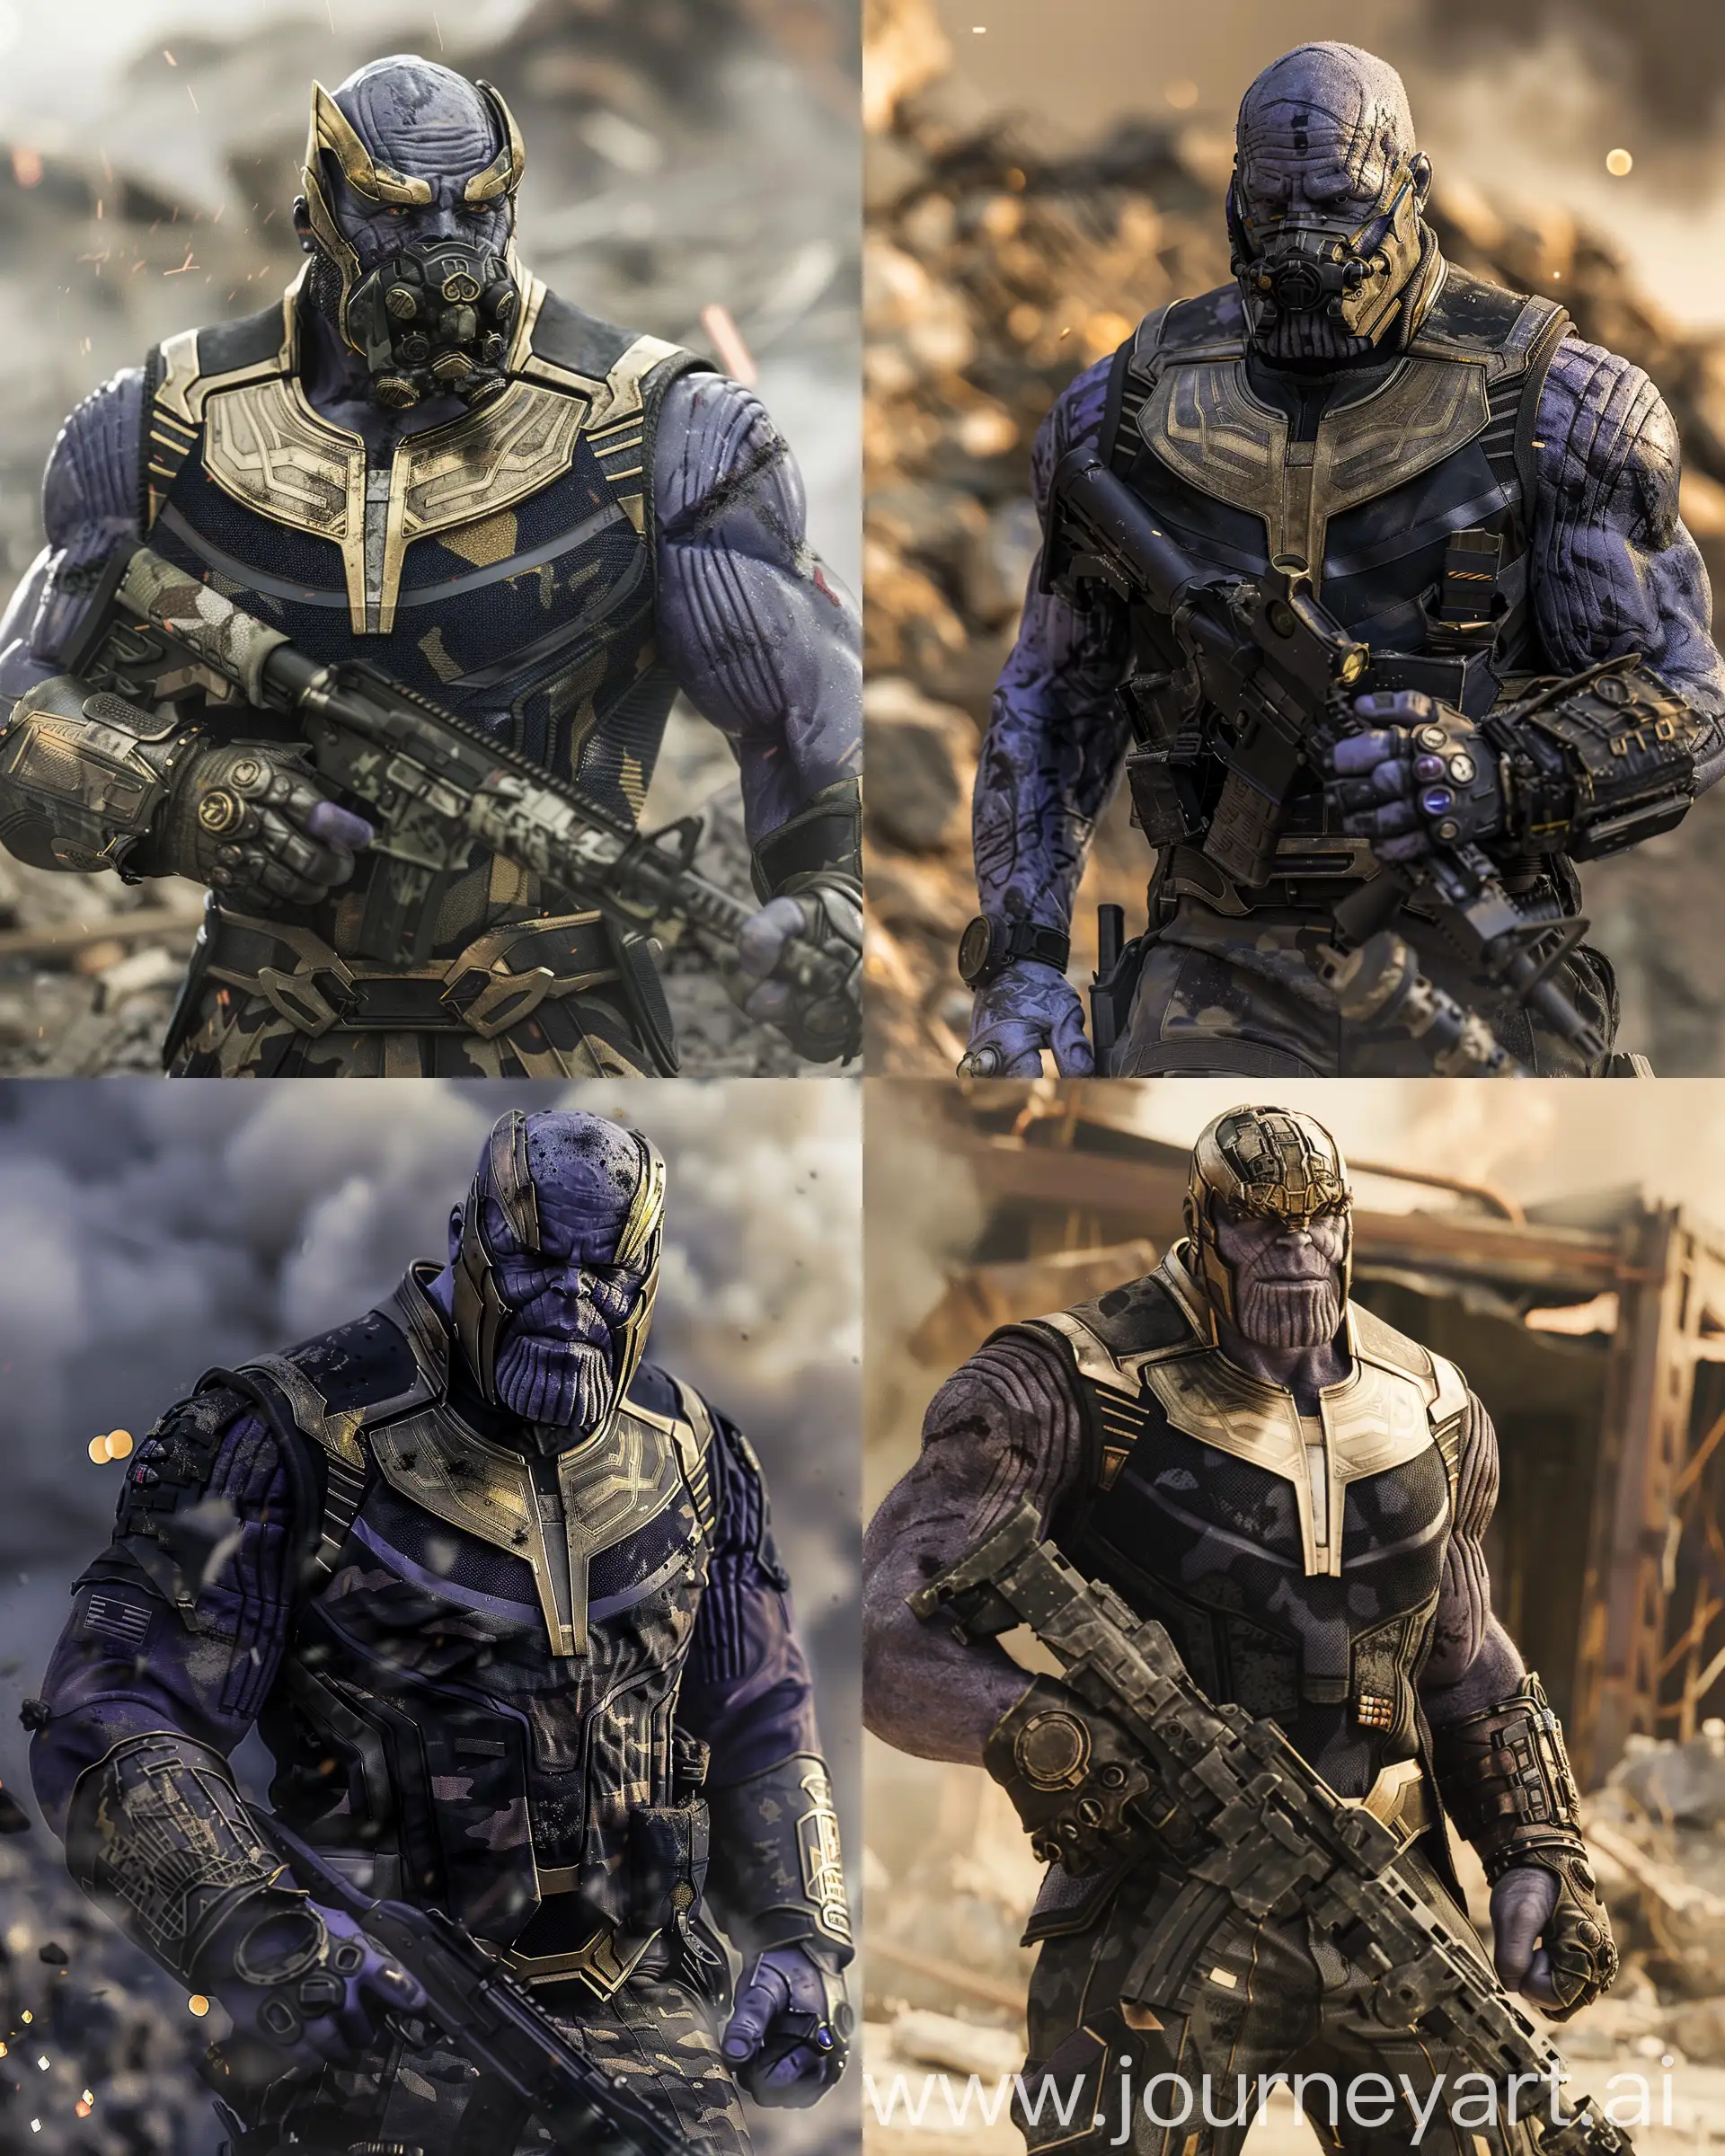 Thanos-in-Special-Forces-Military-Uniform-with-Gas-Mask-and-Advanced-Weapons